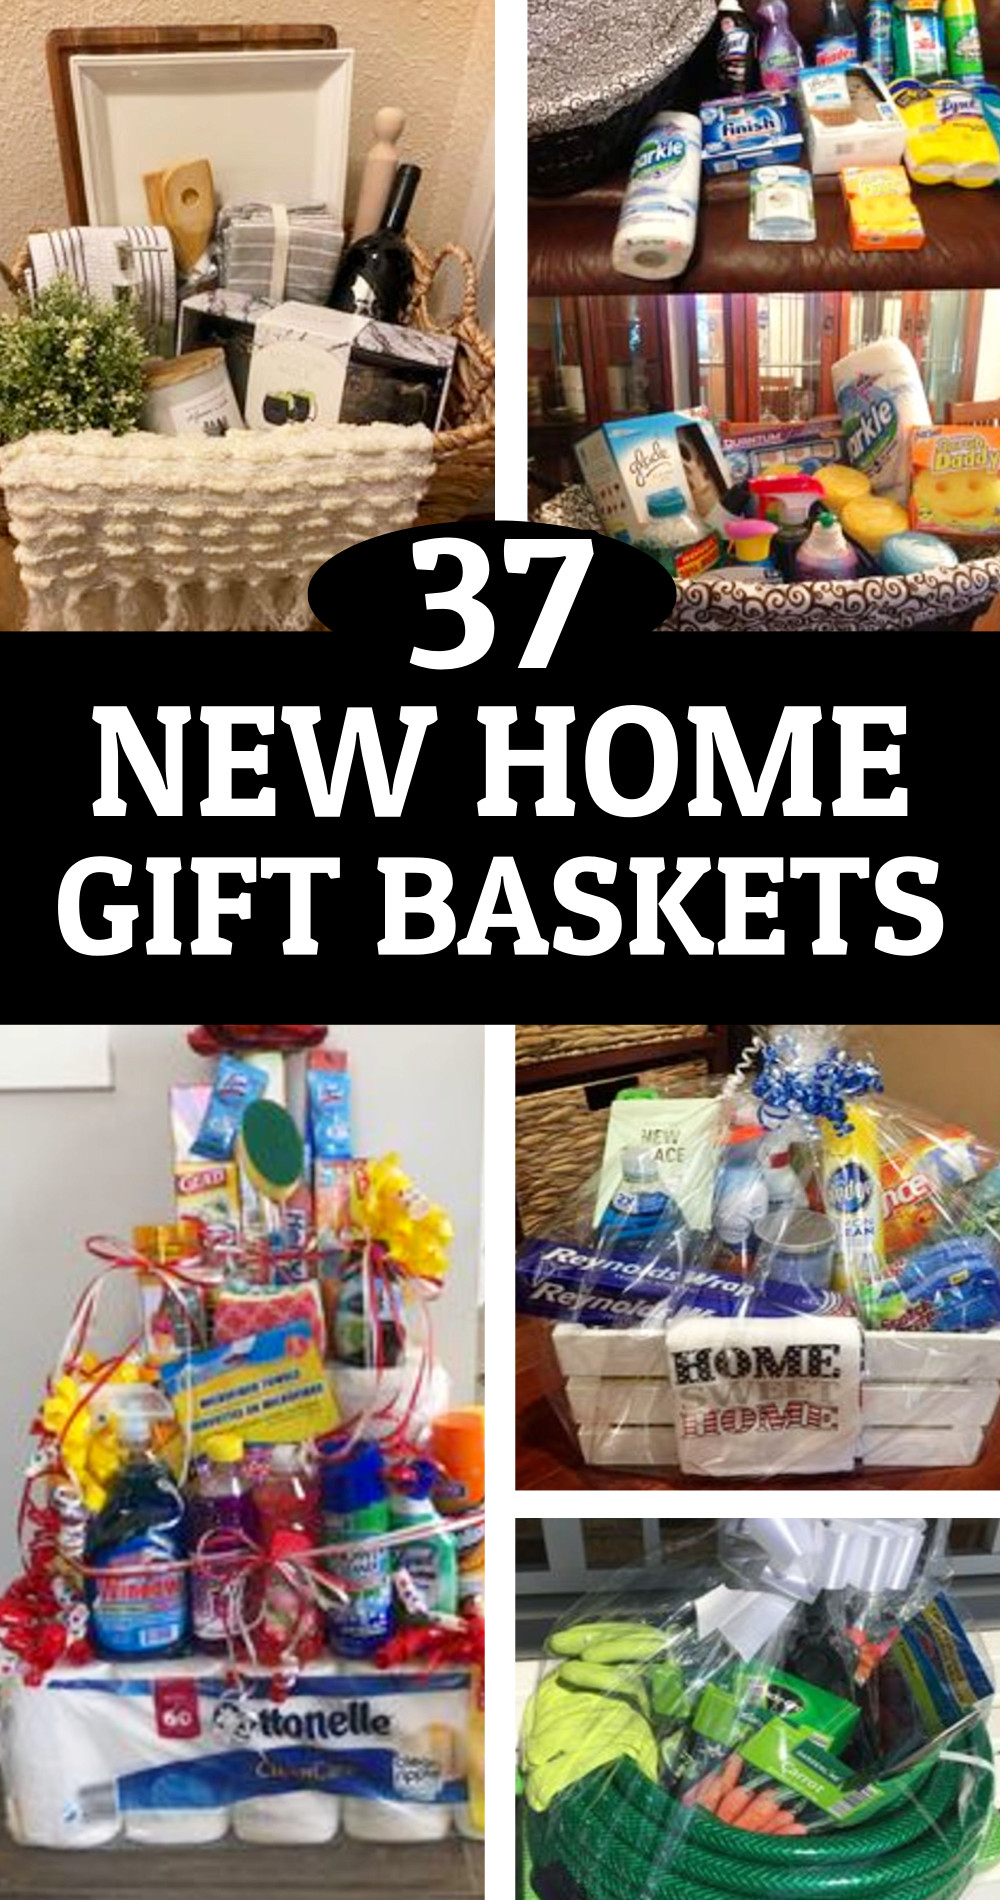 New Home Gift Baskets